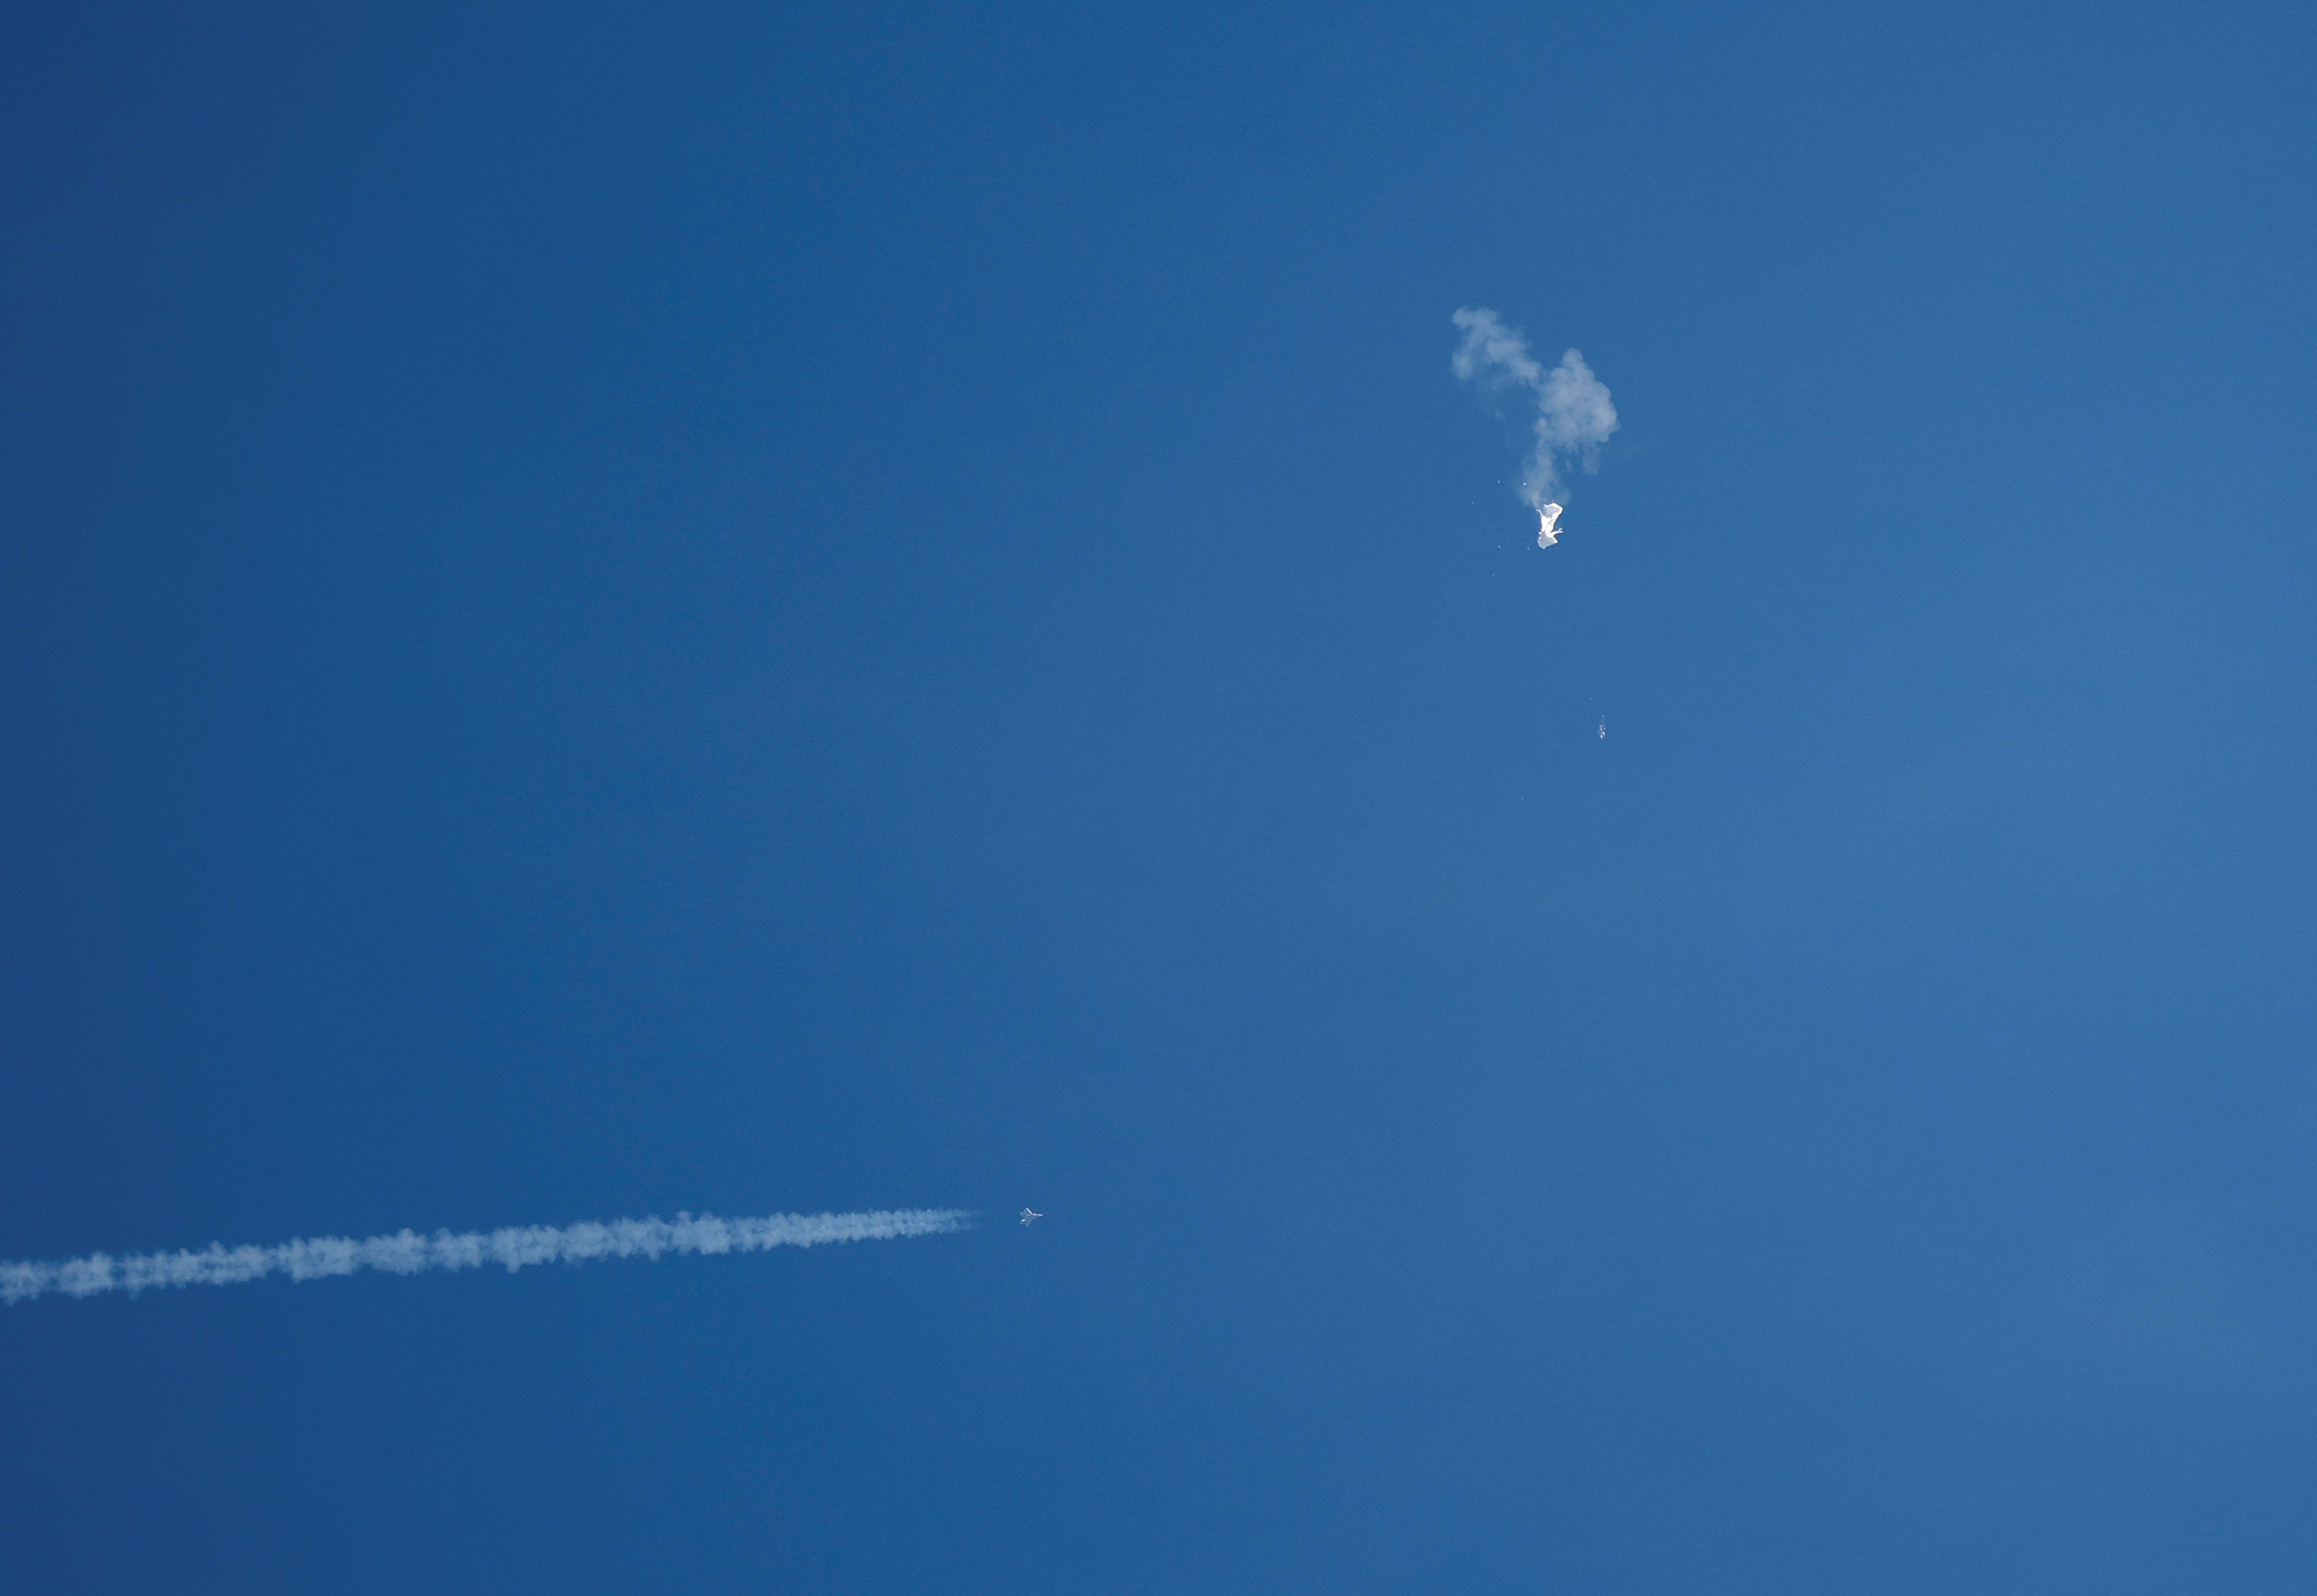 A jet flies by a suspected Chinese spy balloon after shooting it down off the coast in Surfside Beach